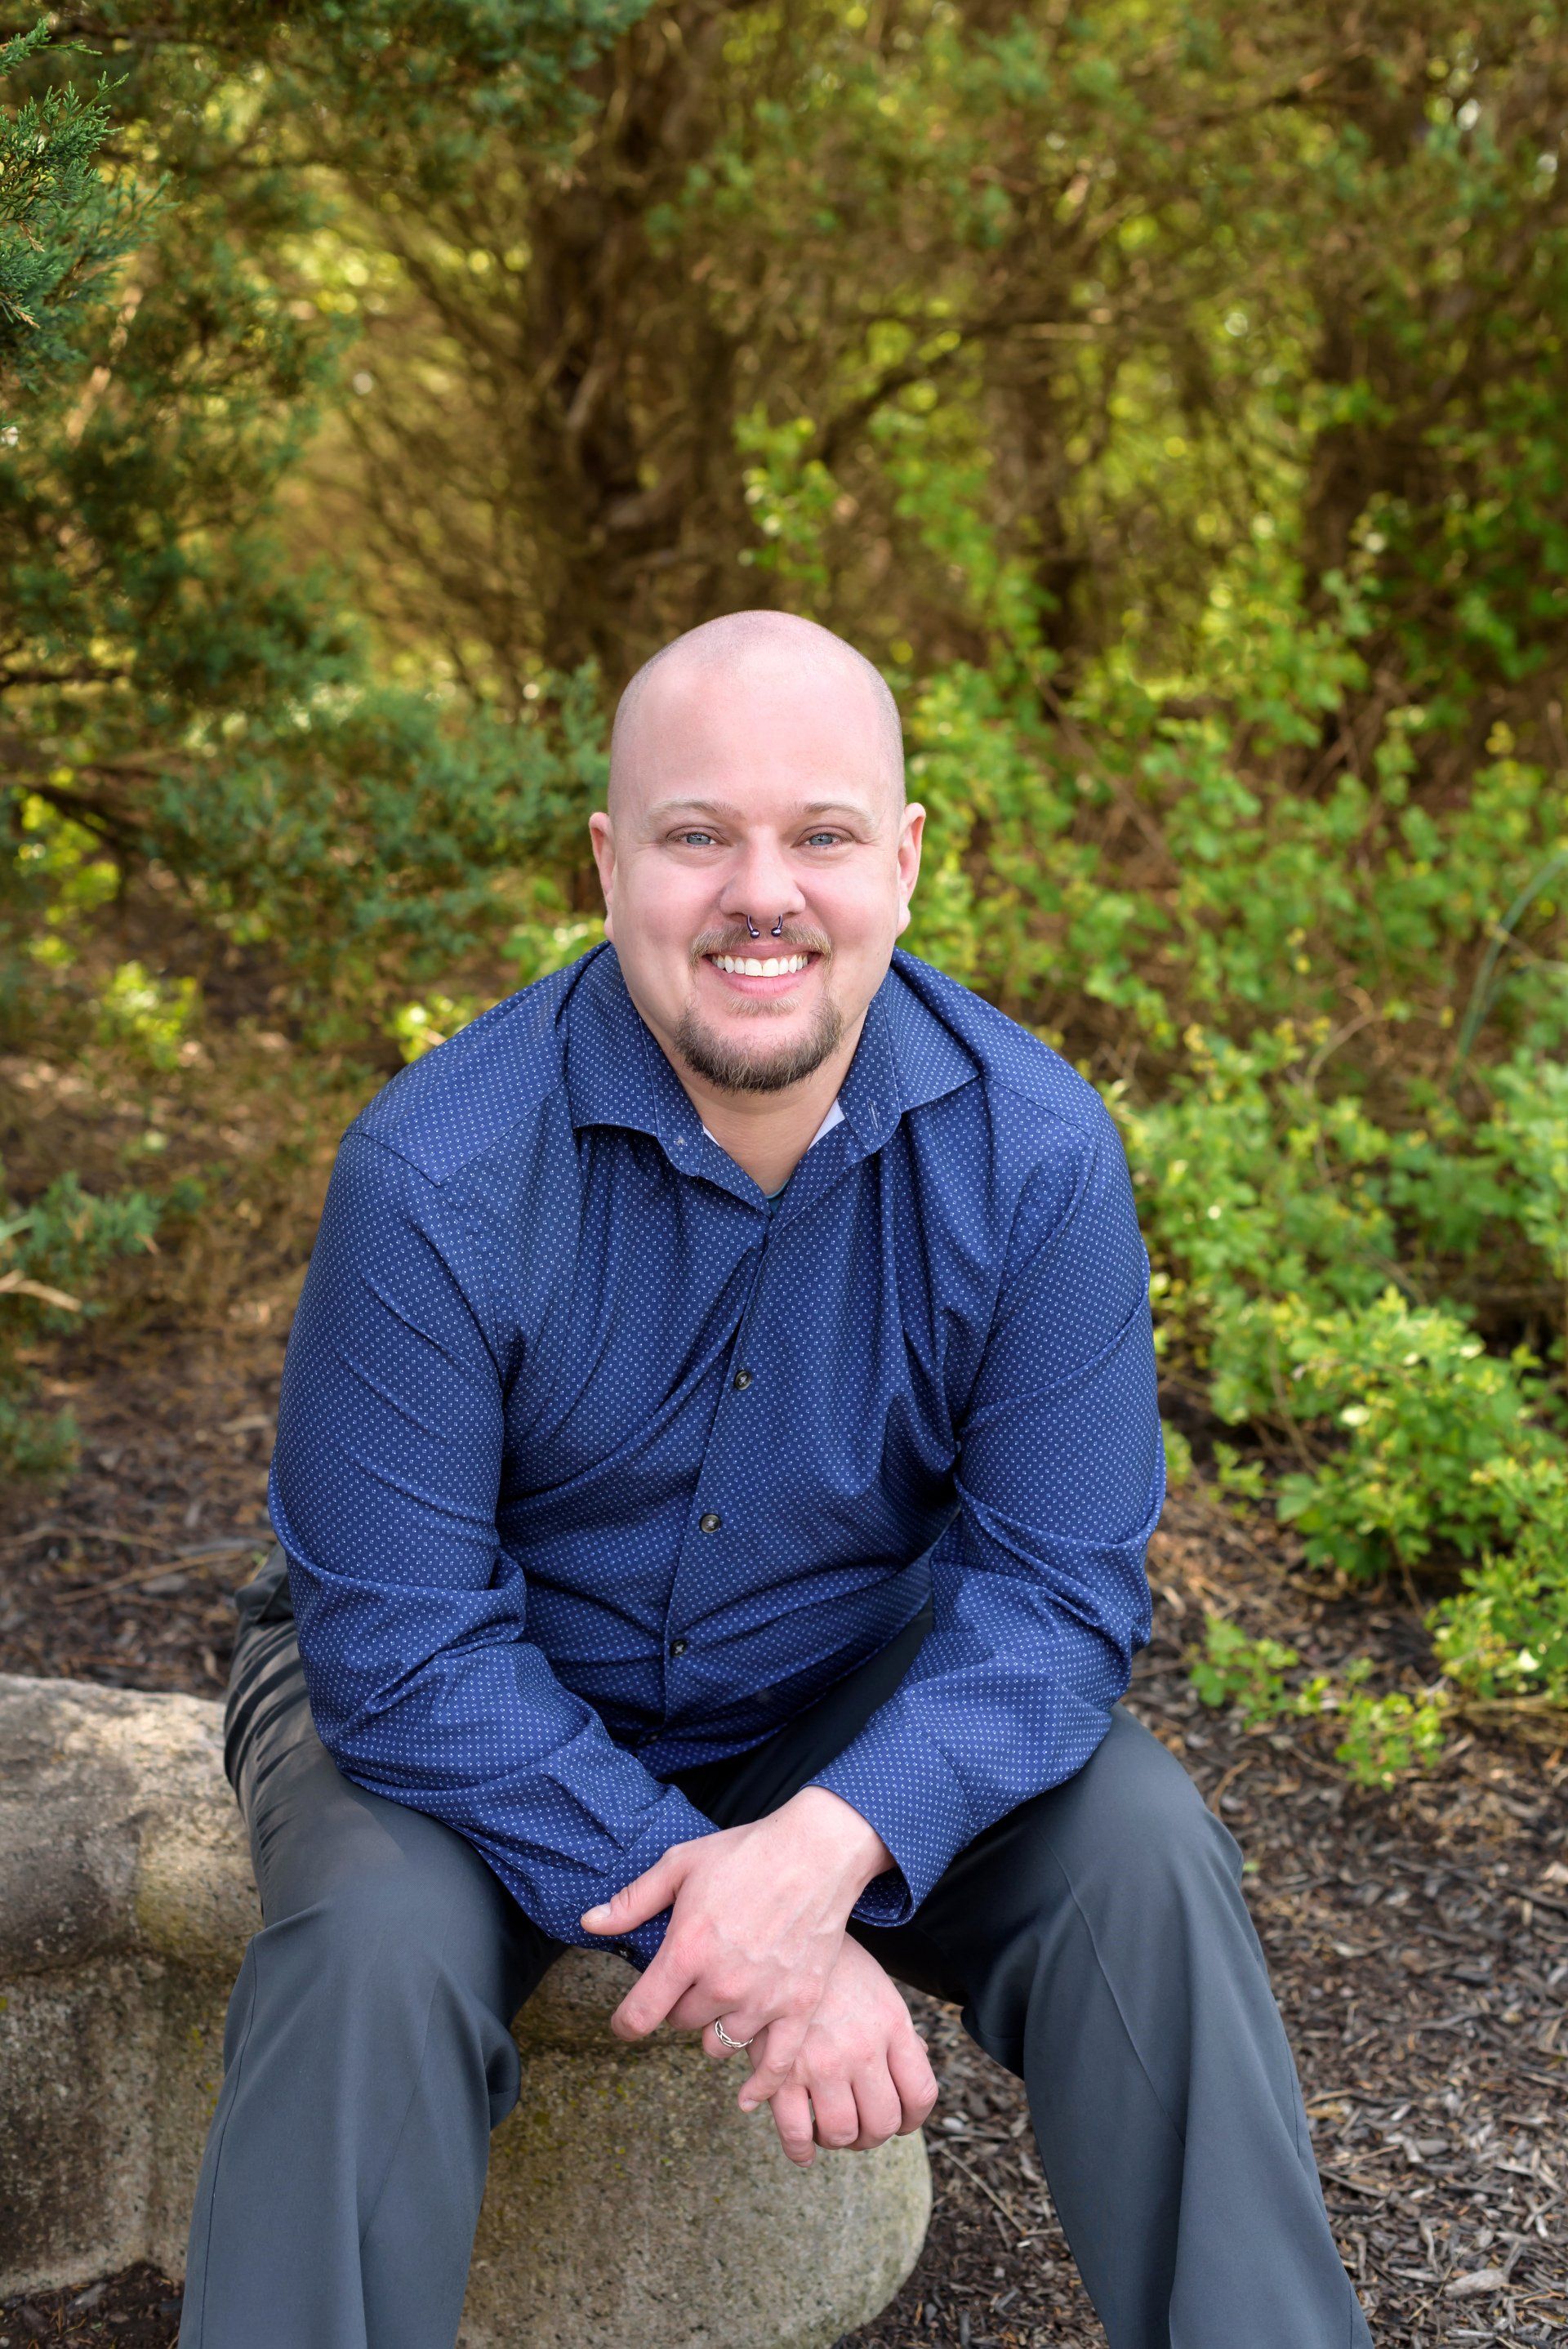 Daniel, a bald, smiling, white man wearing a blue shirt seated in a forested setting